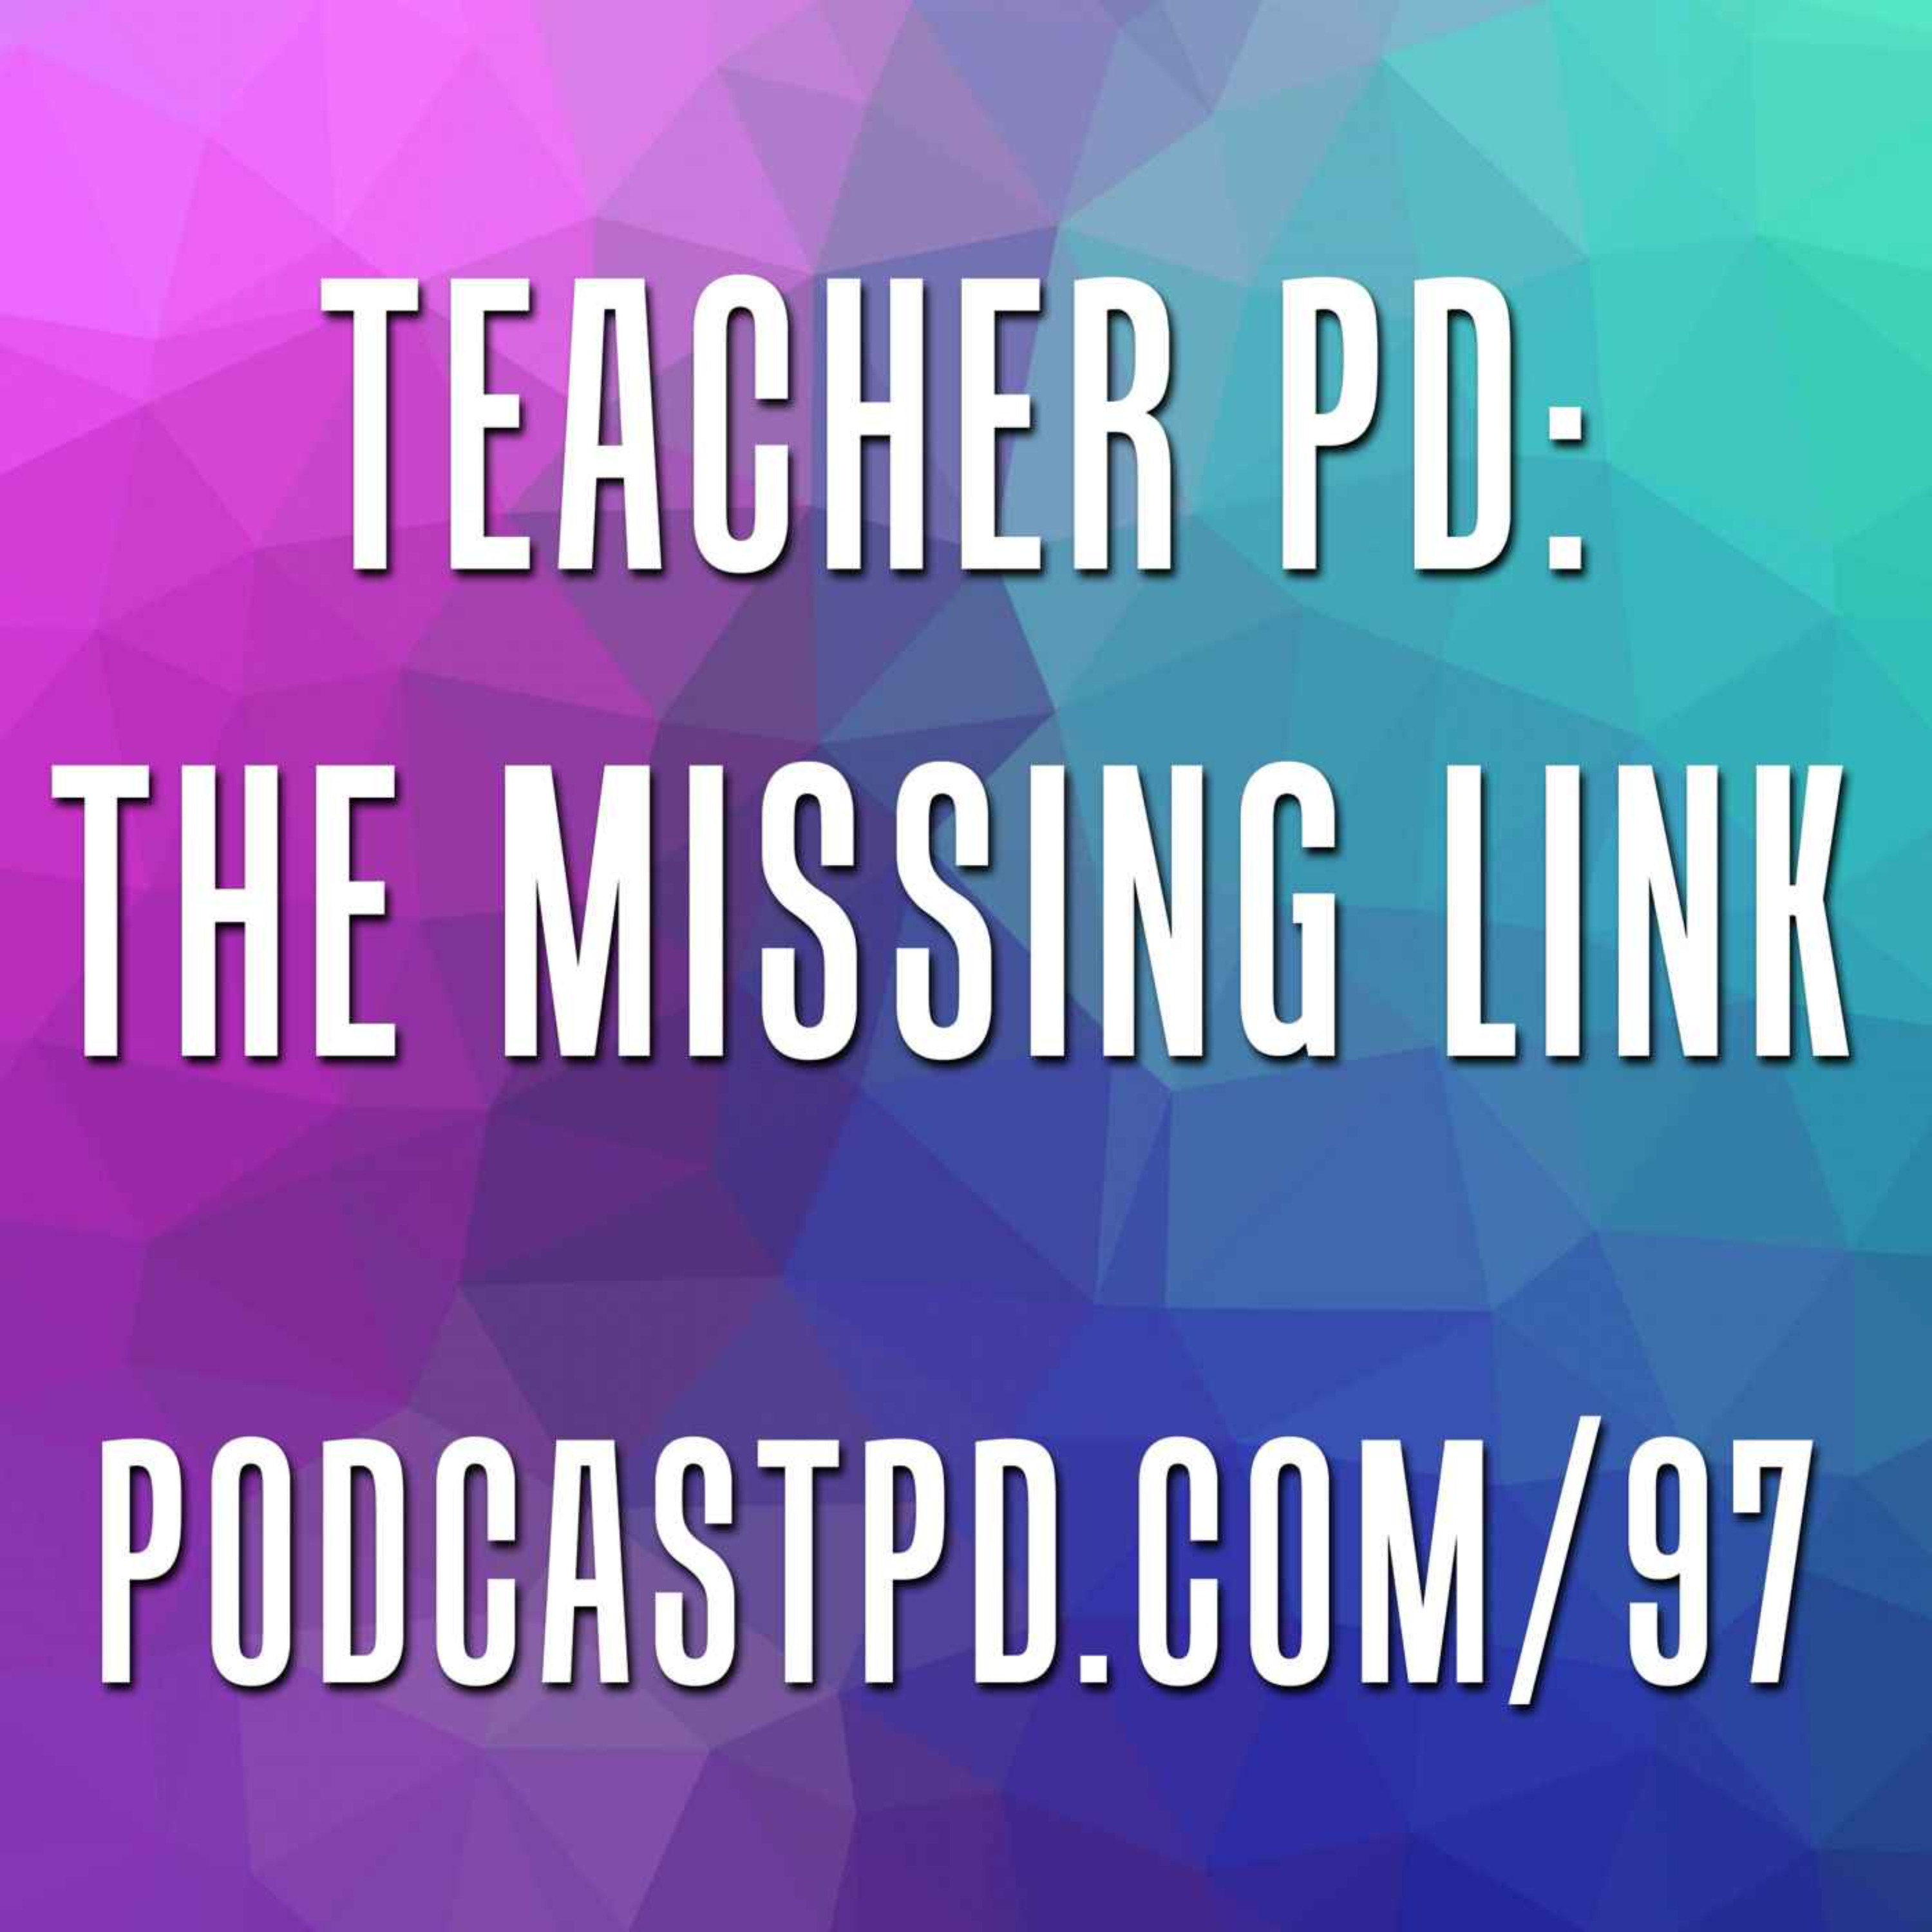 Teacher PD: The Missing Link - PPD097 Image